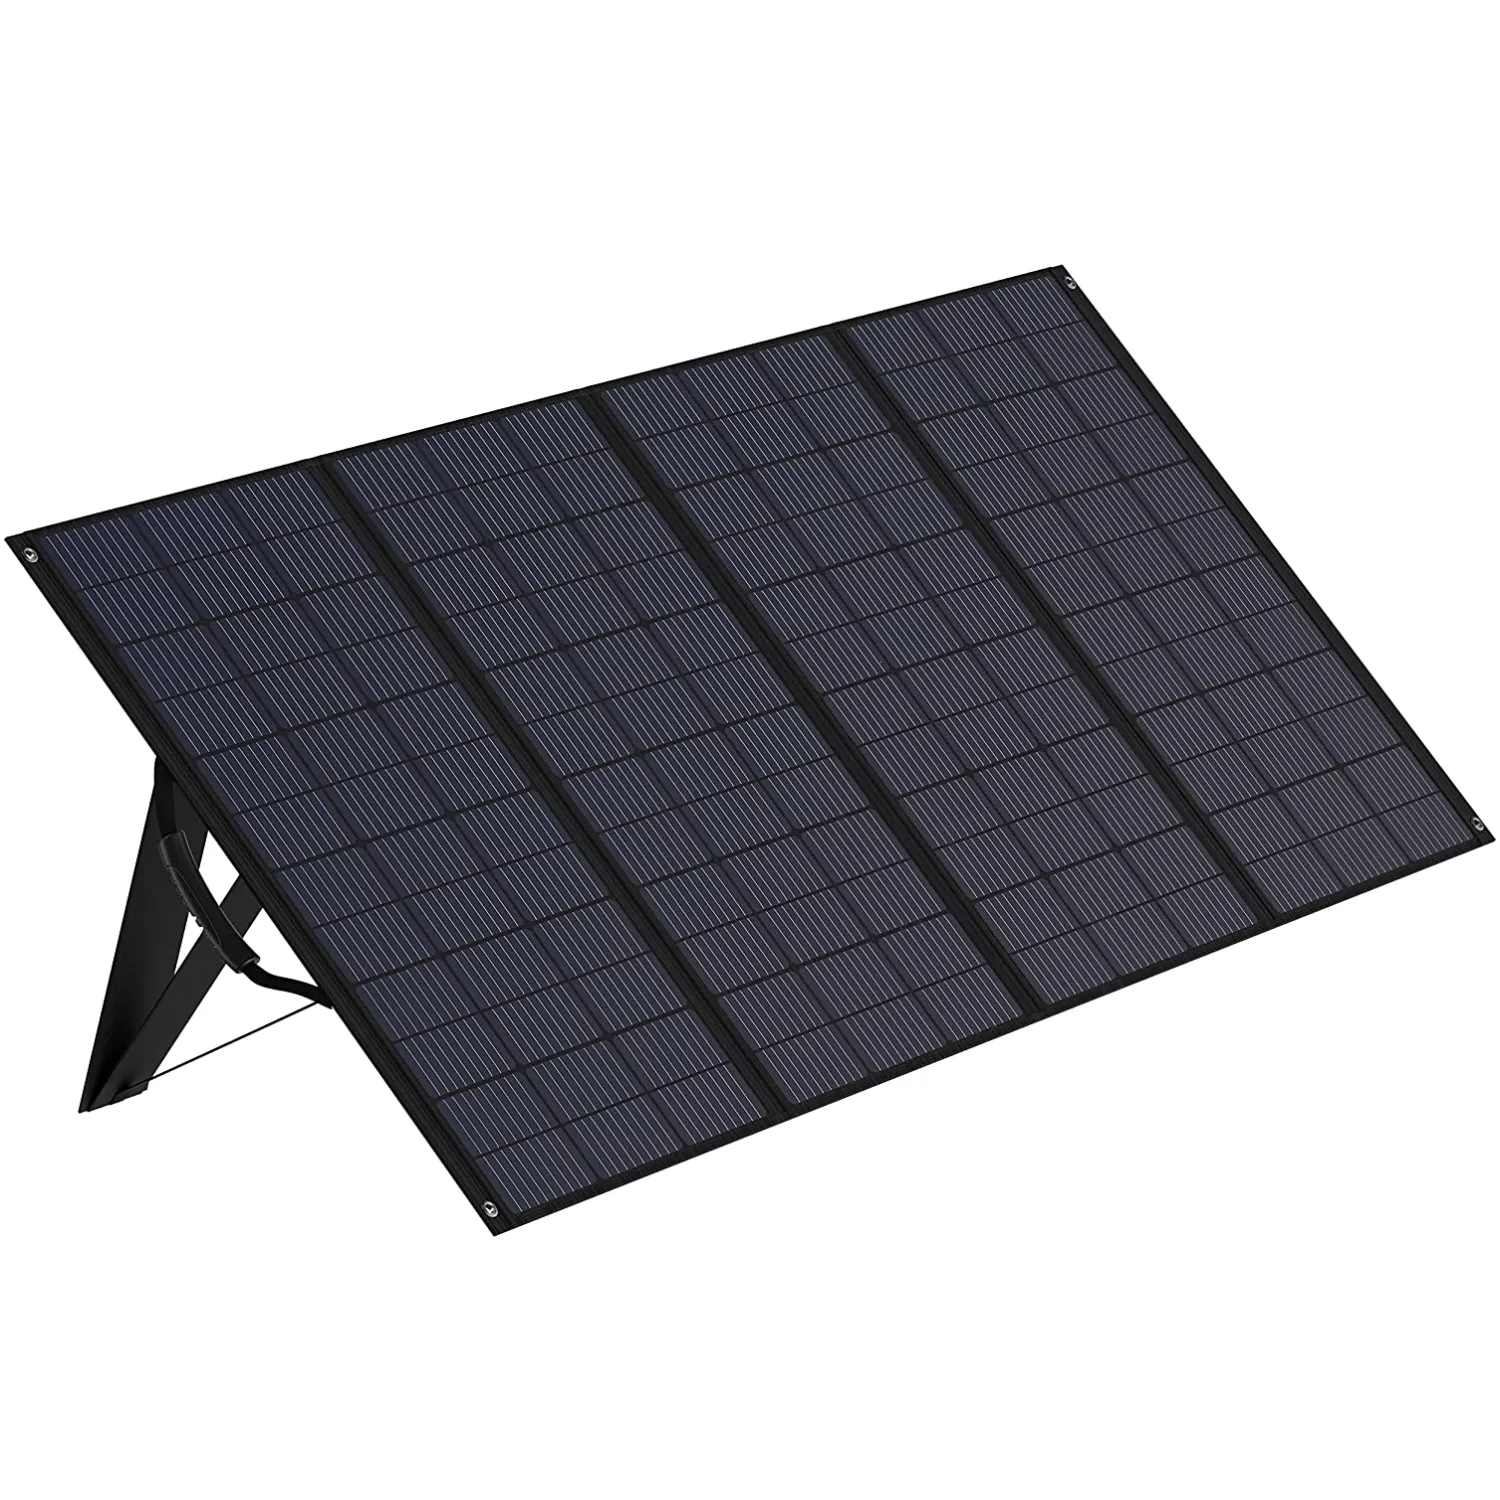 Factory direct 400W Portable Solar Panel Foldable Panel with an Adjustable Kickstand, Waterproof IP65, MC4 Output Solar Charger